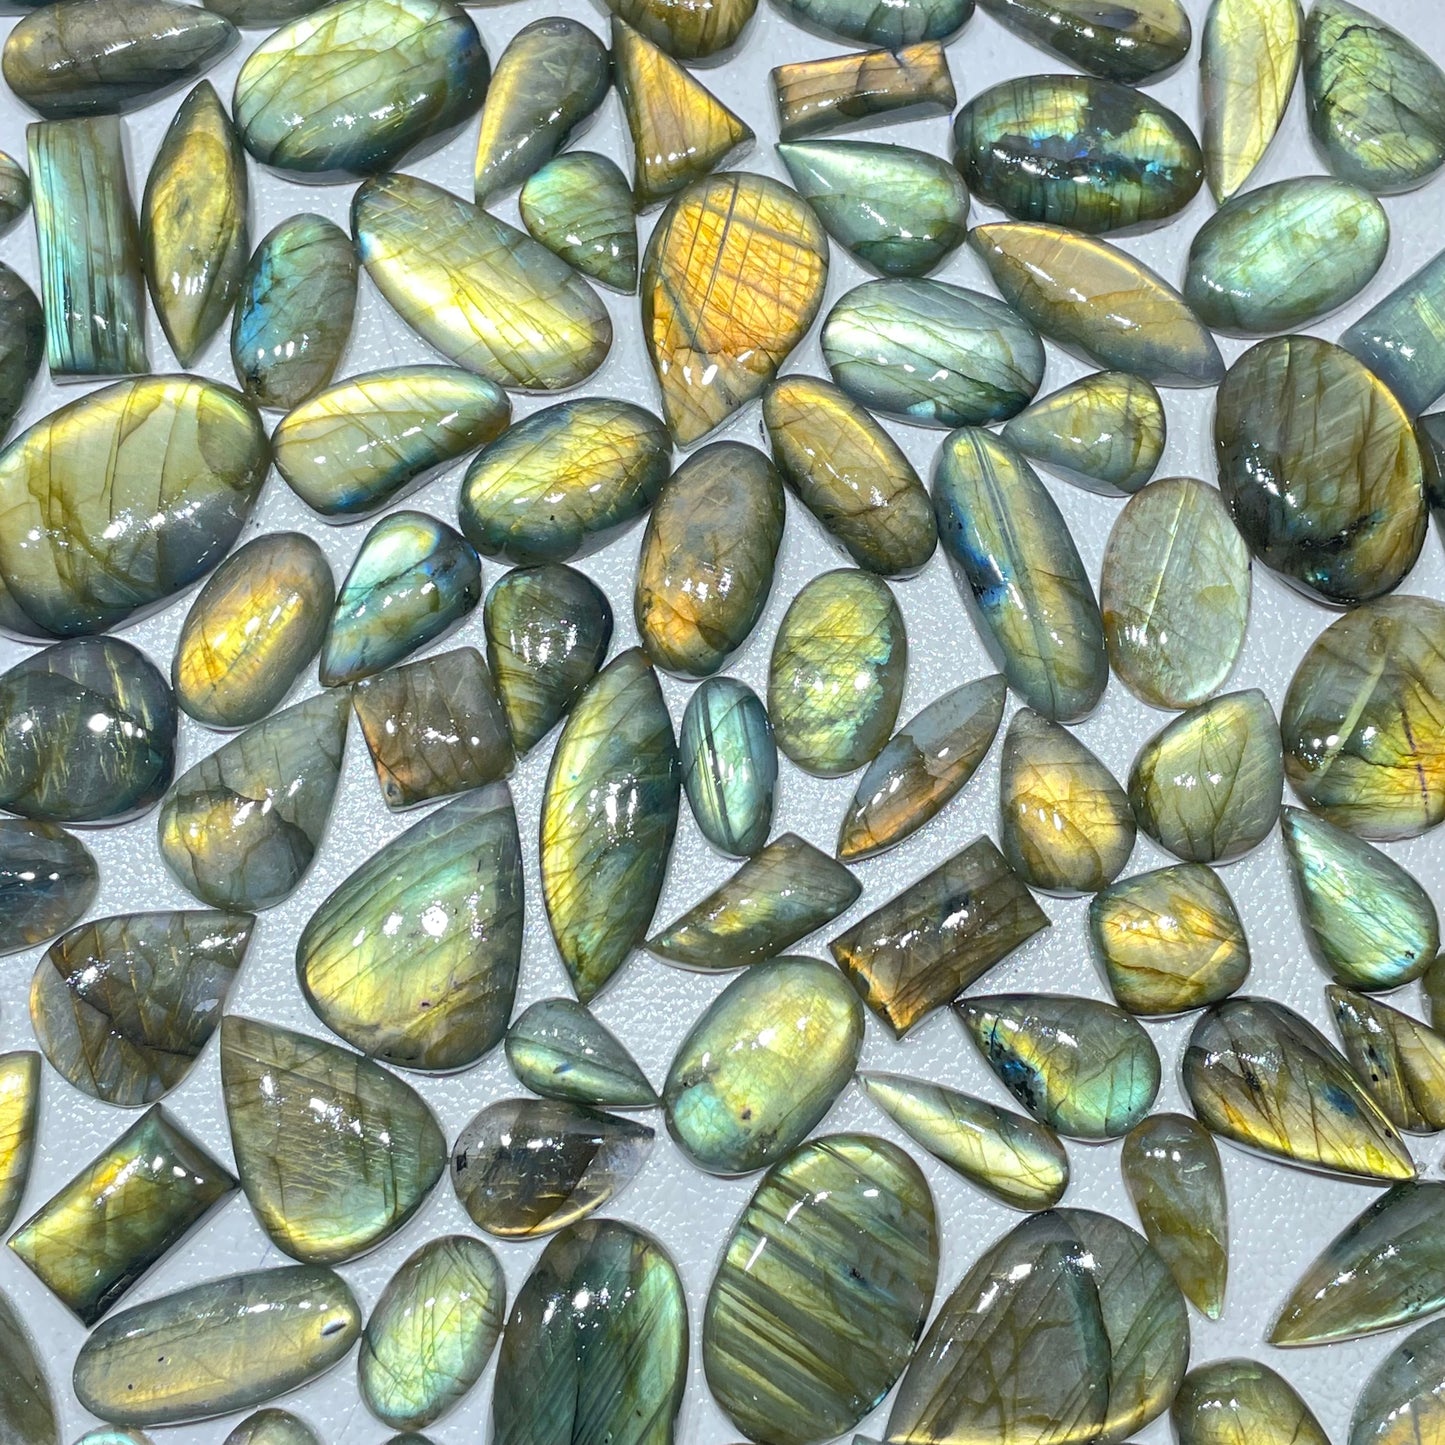 Discover the Mesmerizing Beauty of Handcrafted Yellow Flashy Labradorite Cabochons - High-Quality Gems at an Affordable Price (Natural)